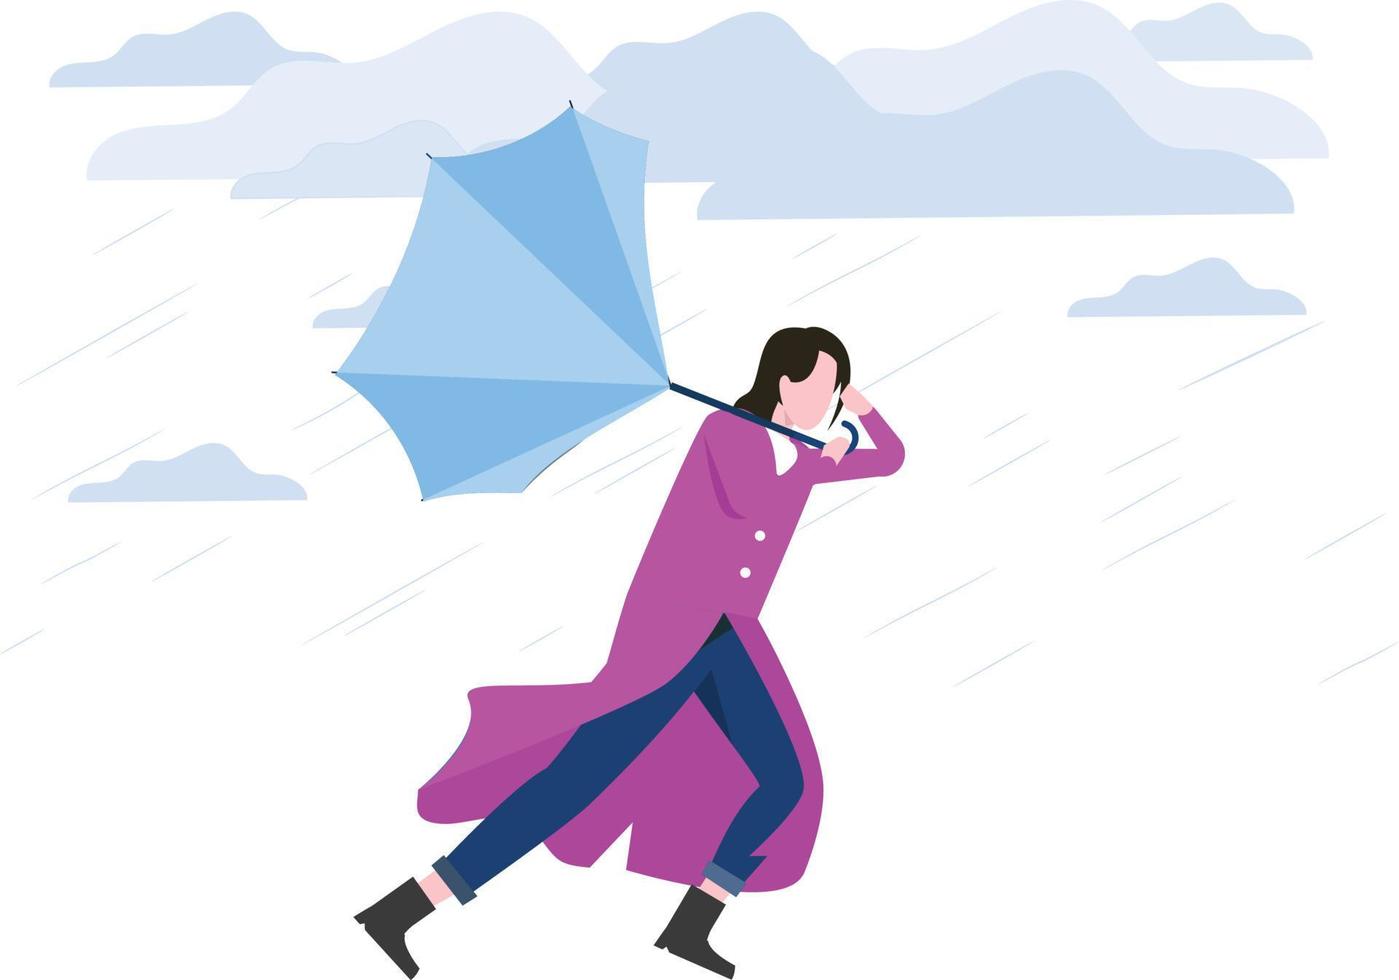 The girl's umbrella is blown away by the storm. vector